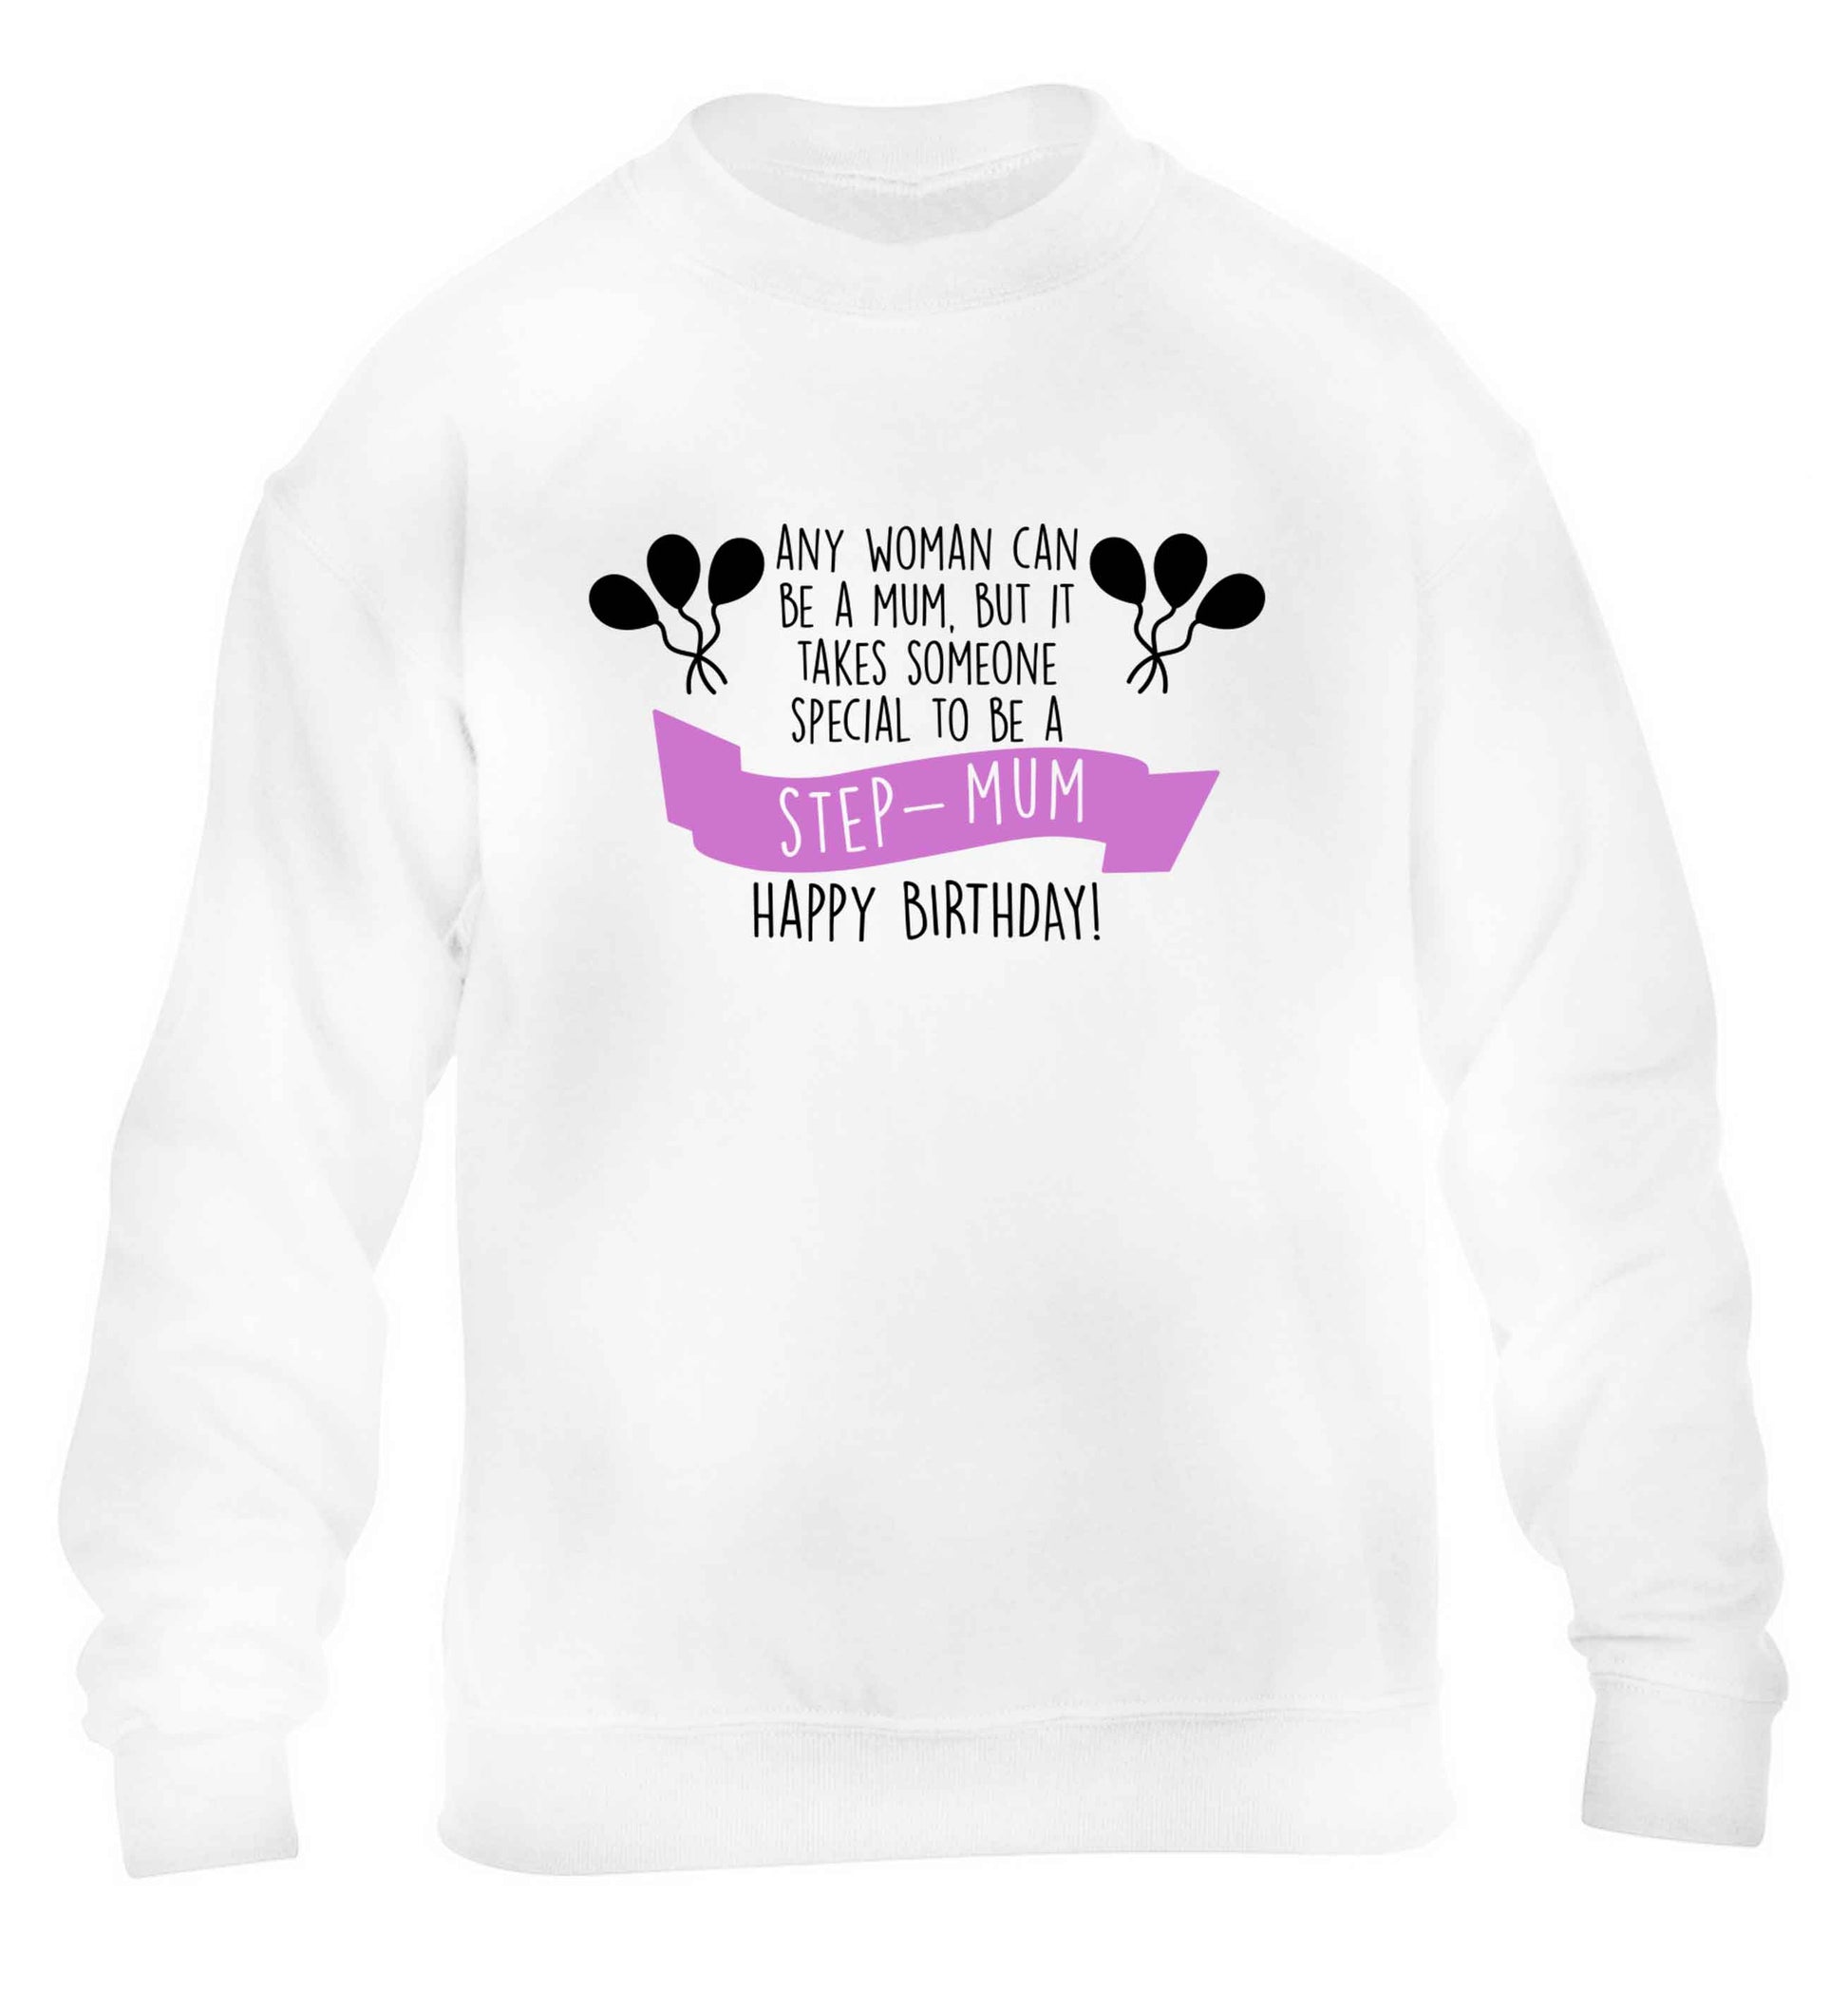 Takes someone special to be a step-mum, happy birthday! children's white sweater 12-13 Years